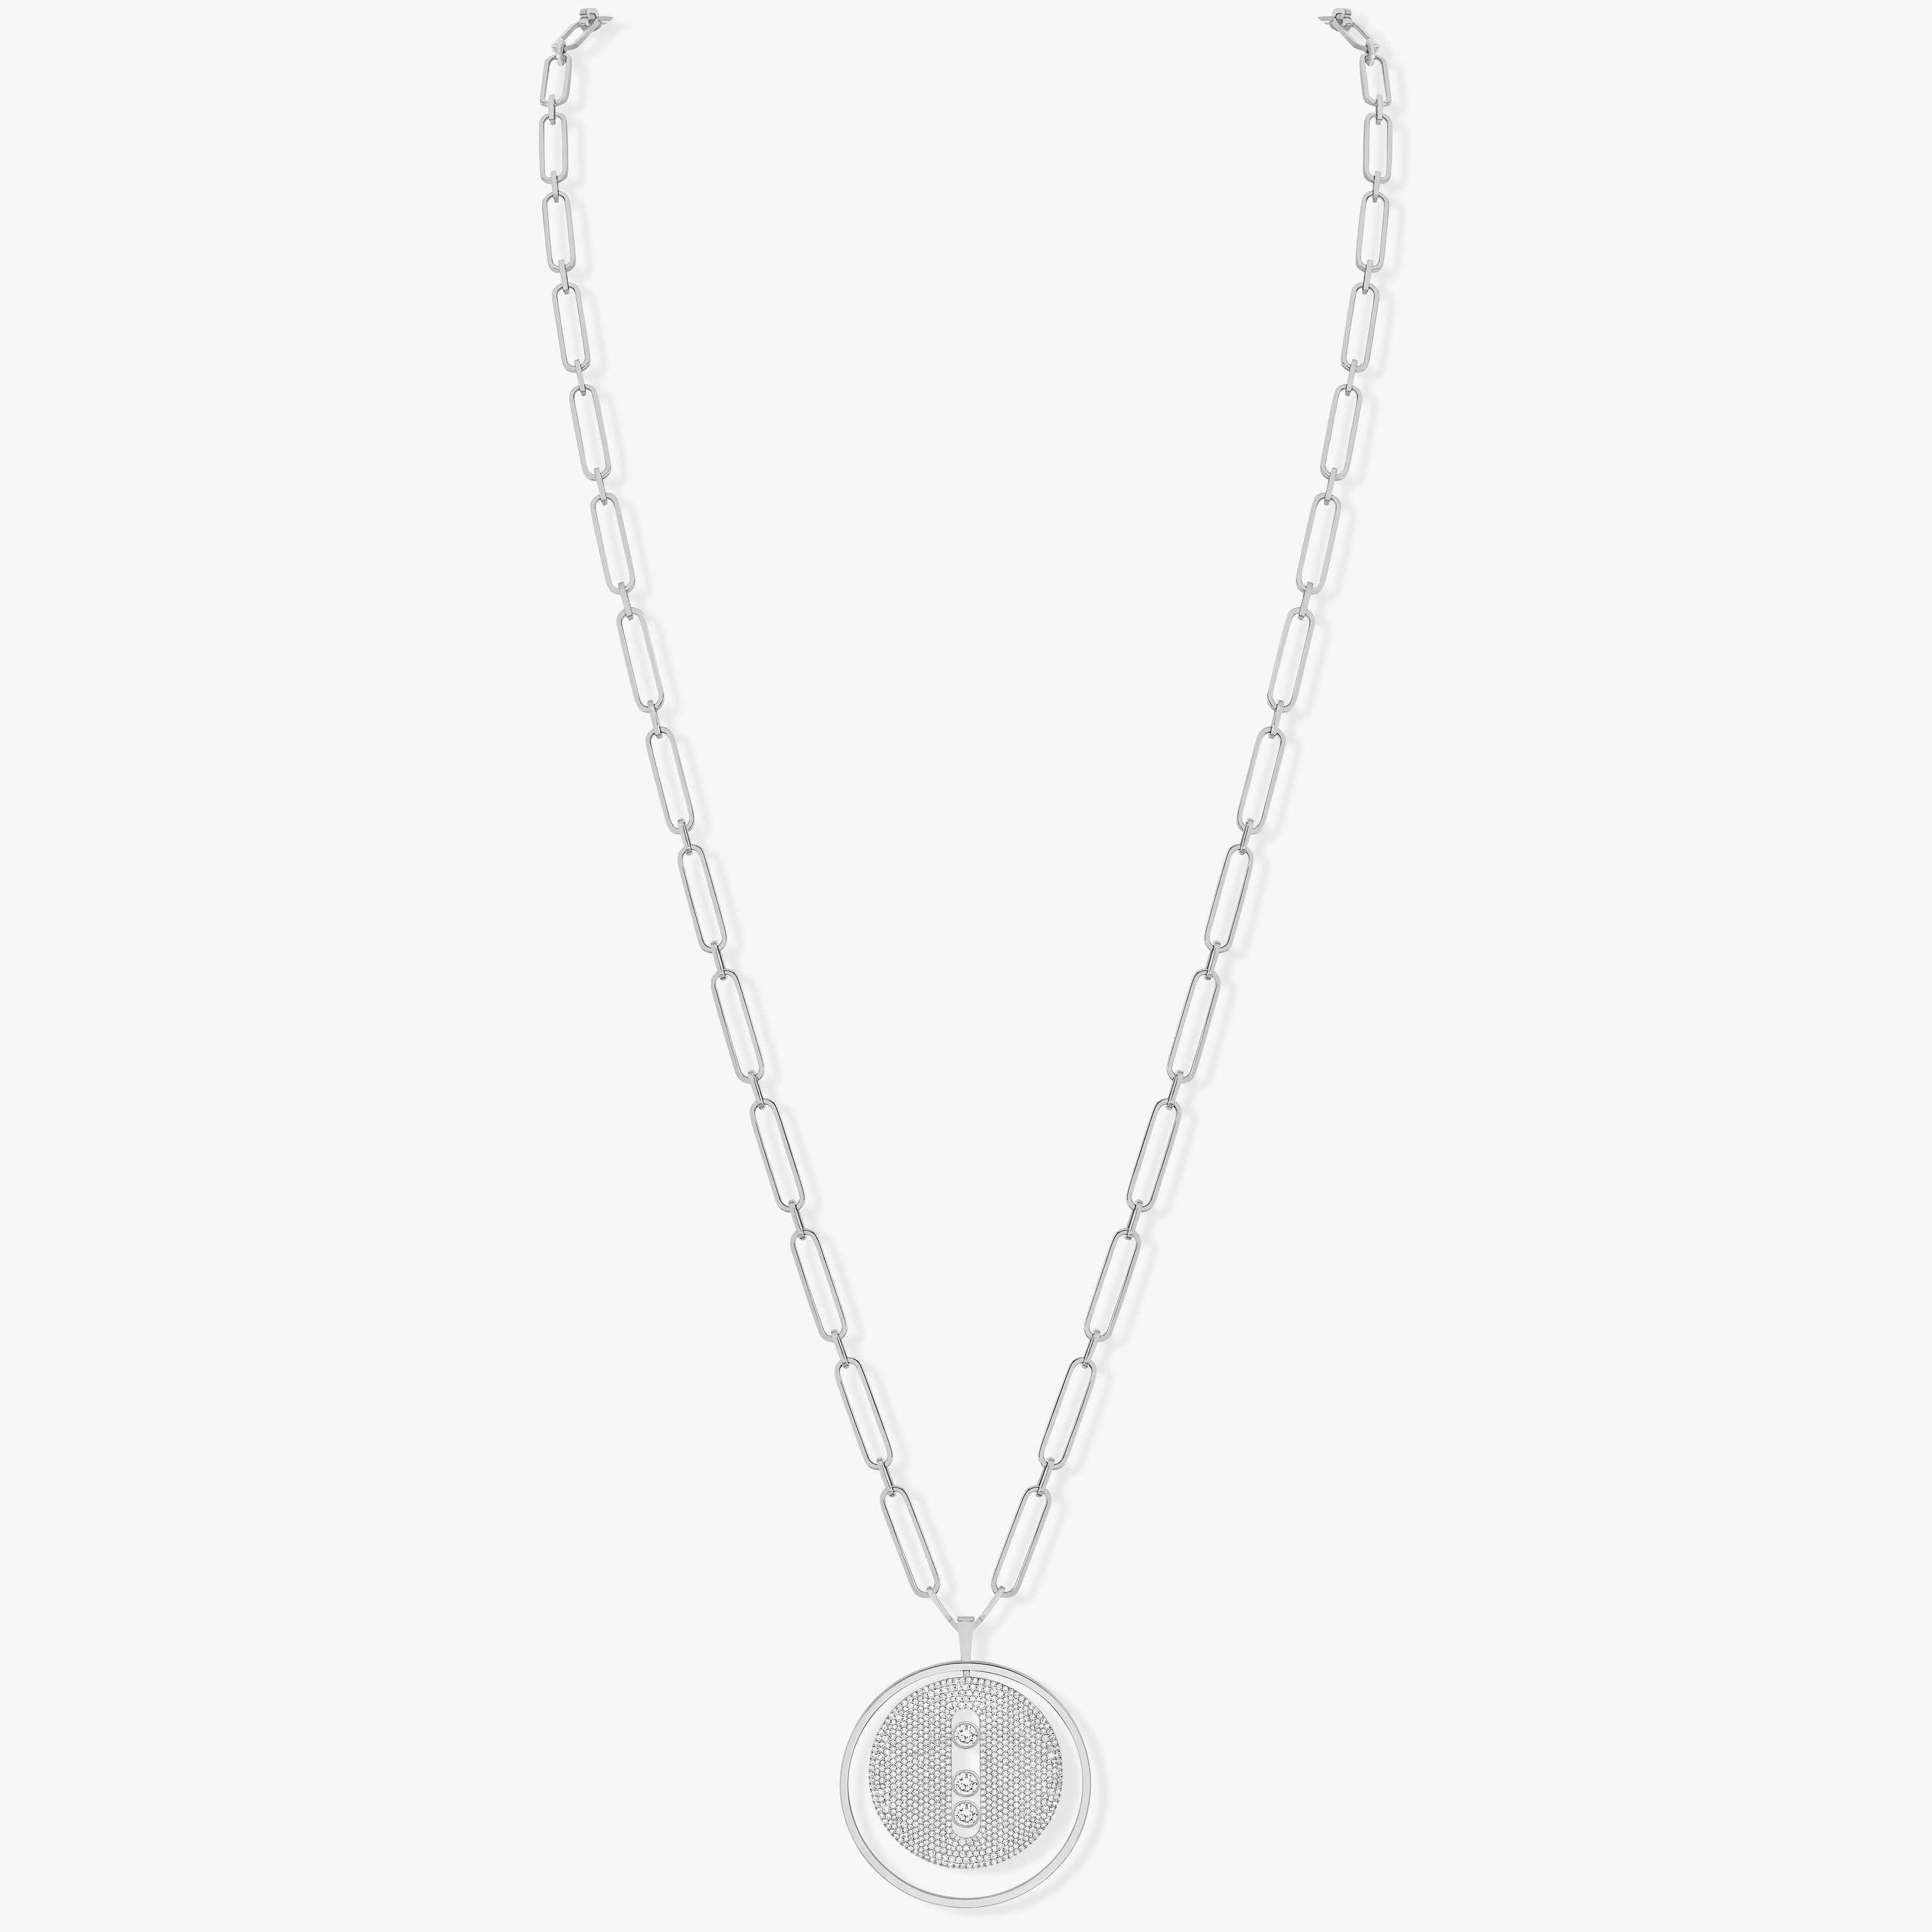 Necklace For Her White Gold Diamond Lucky Move Long Necklace Pavé LM 10127-WG